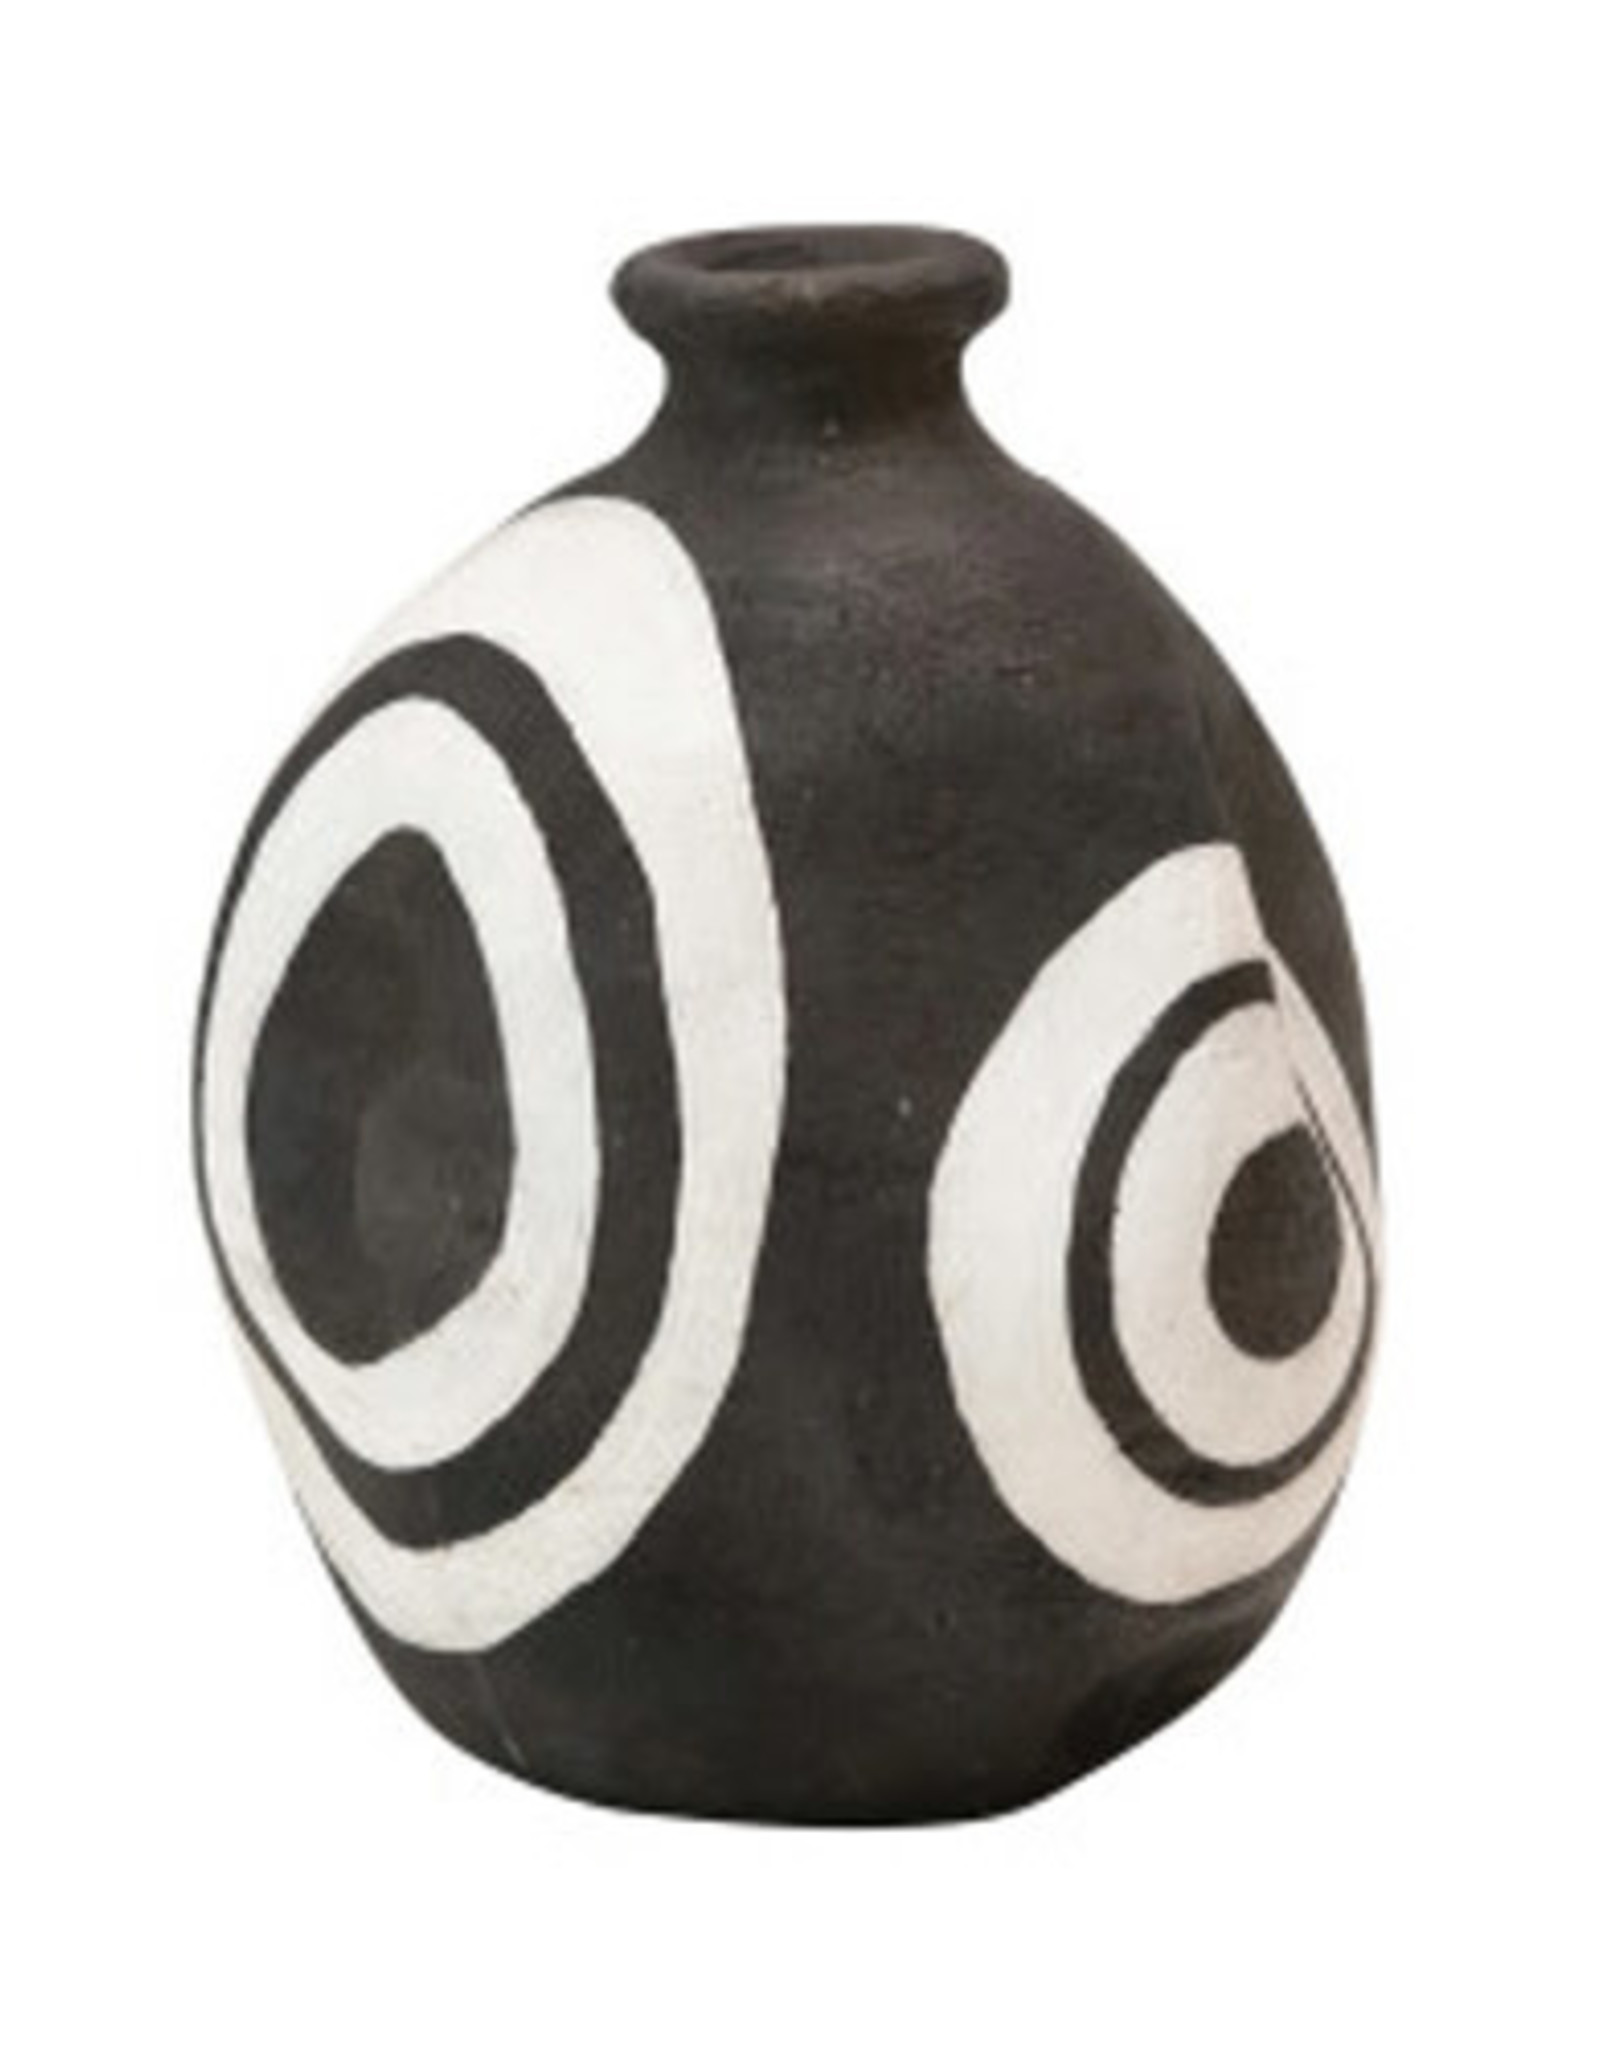 Black with White Terracotta Vase with Circles H5.5"